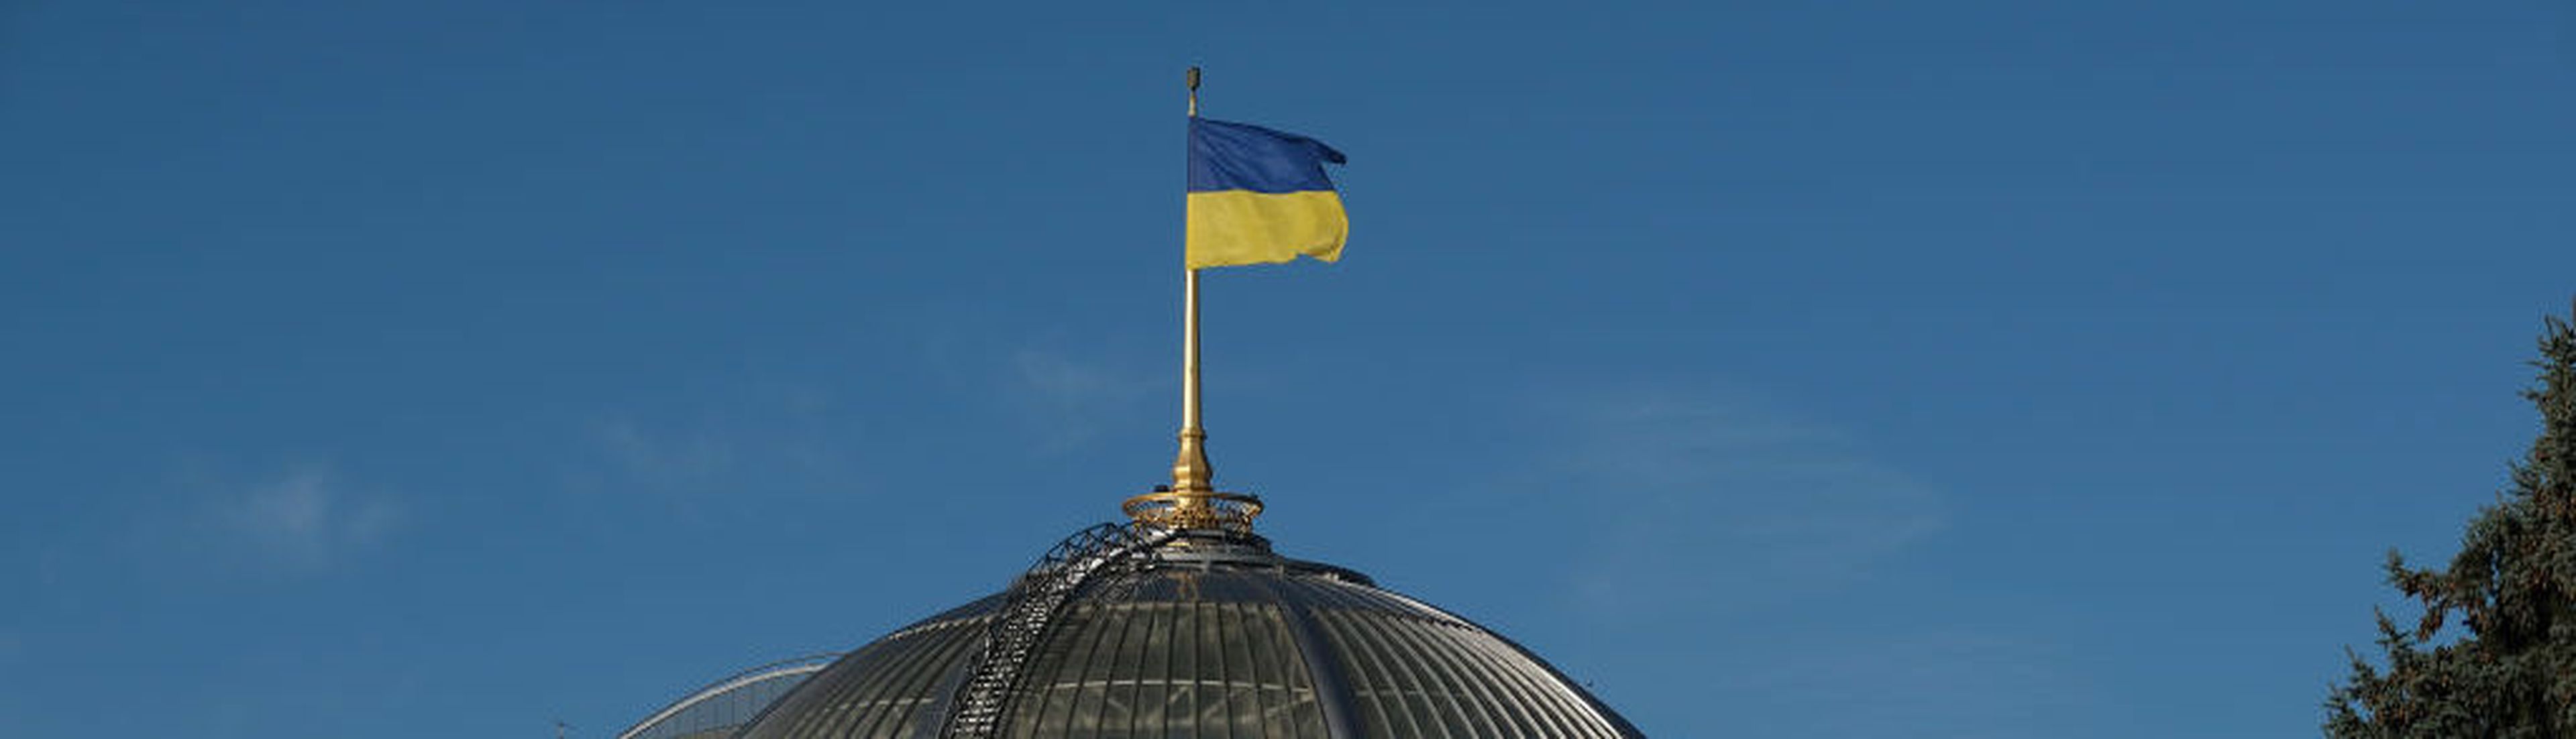 KIEV, UKRAINE &#8211; OCTOBER 02: The Ukrainian flag flies over the Verchovna Rada, the Ukrainian Parliament, on October 02, 2019 in Kiev, Ukraine. Ukraine has found itself at the core of a political storm in U.S. politics since the release of a whistleblower&#8217;s complaint suggesting U.S. President Donald Trump, at the expense of U.S. foreign p...